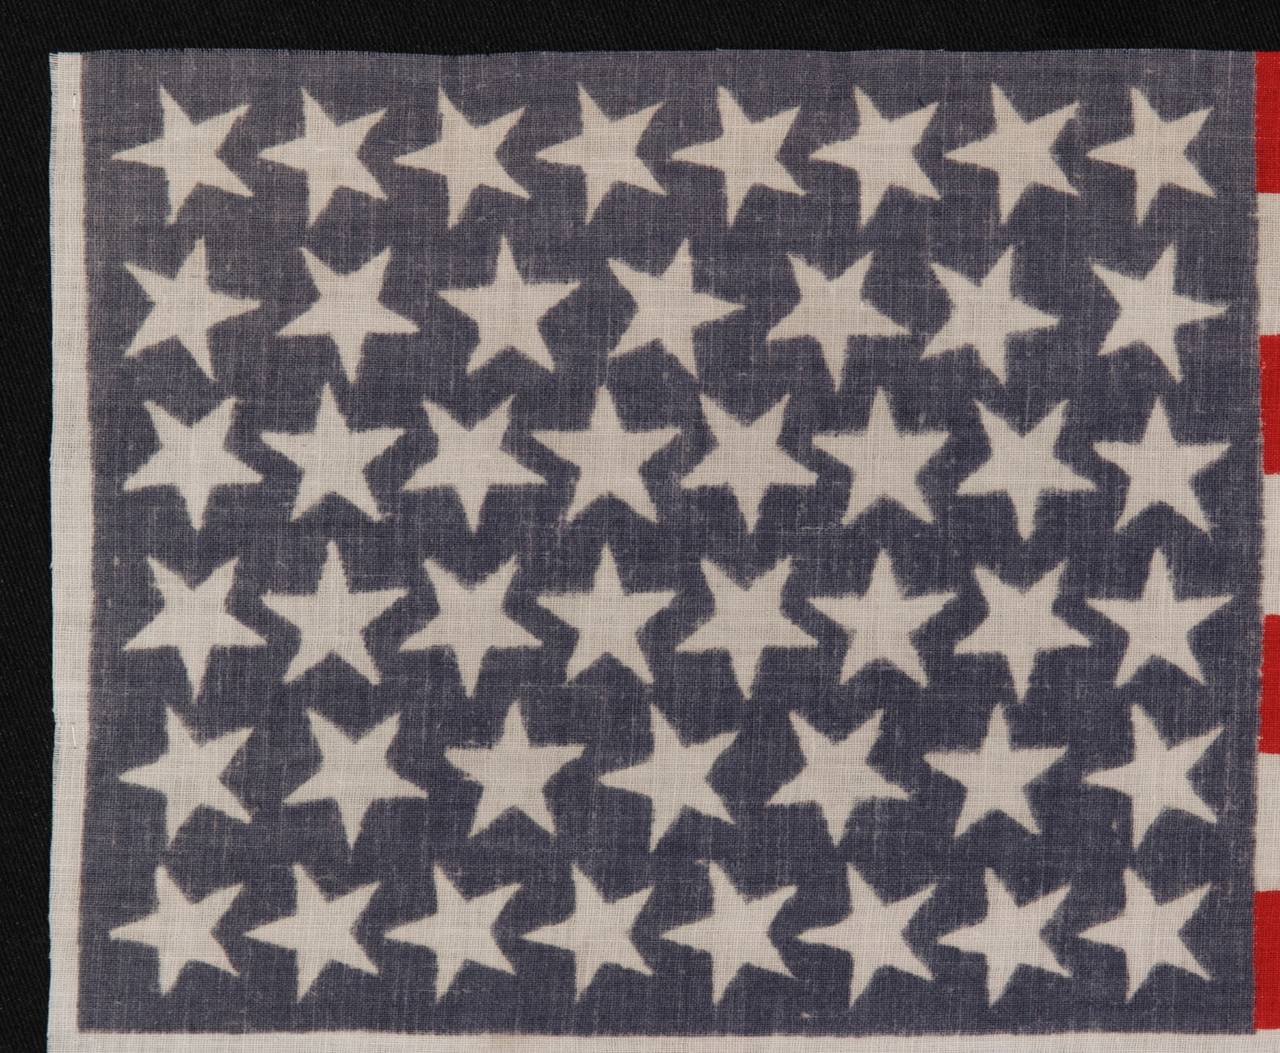 46 stars with varied star positioning, 1907-1912, Oklahoma statehood:

 46 star American national parade flag, printed on plain weave cotton. The stars of the flag are configured in staggered rows of 8-7-8-8-7-8, which is typical of this star